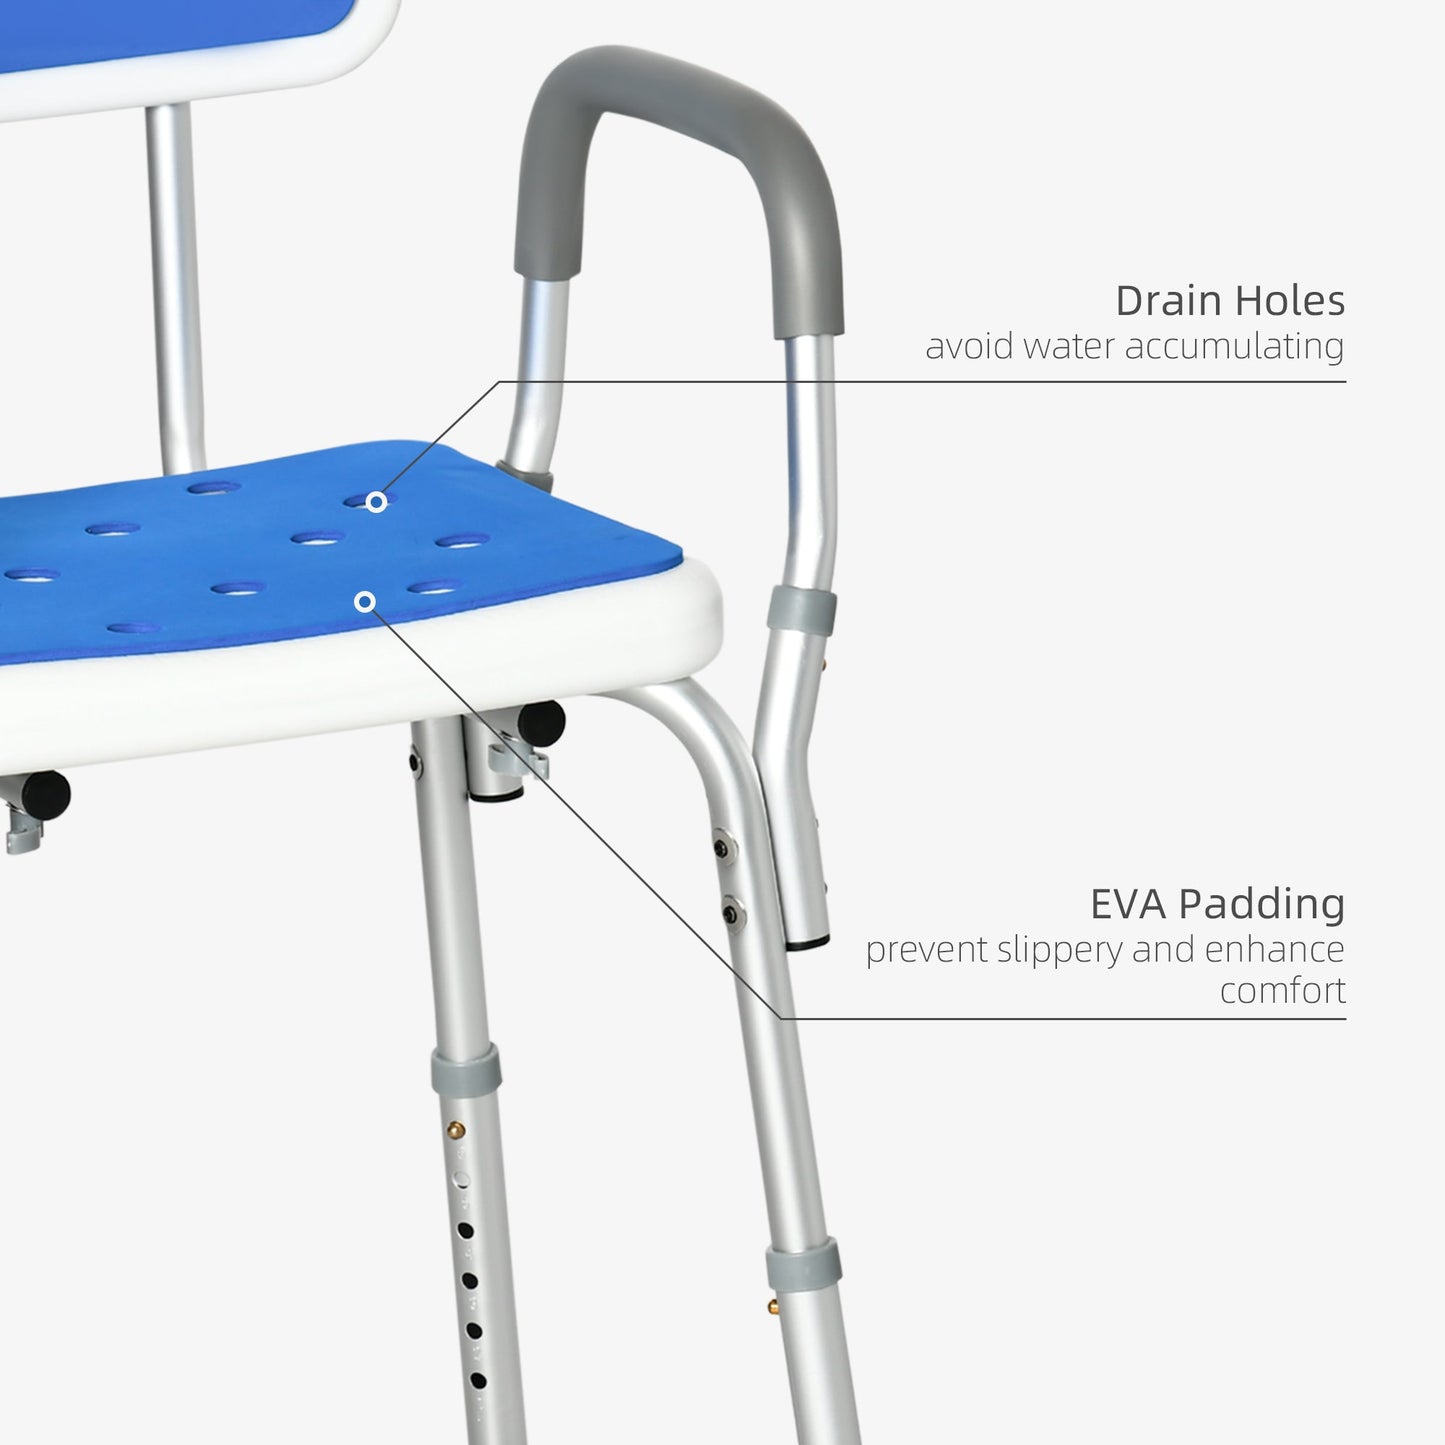 Adjustable Shower Chair with Arms and Back, Bath Chair with Padded Seat, Anti-slip Shower Bench for Seniors and Disabled, Tool-Free Assembly, 299lbs at Gallery Canada